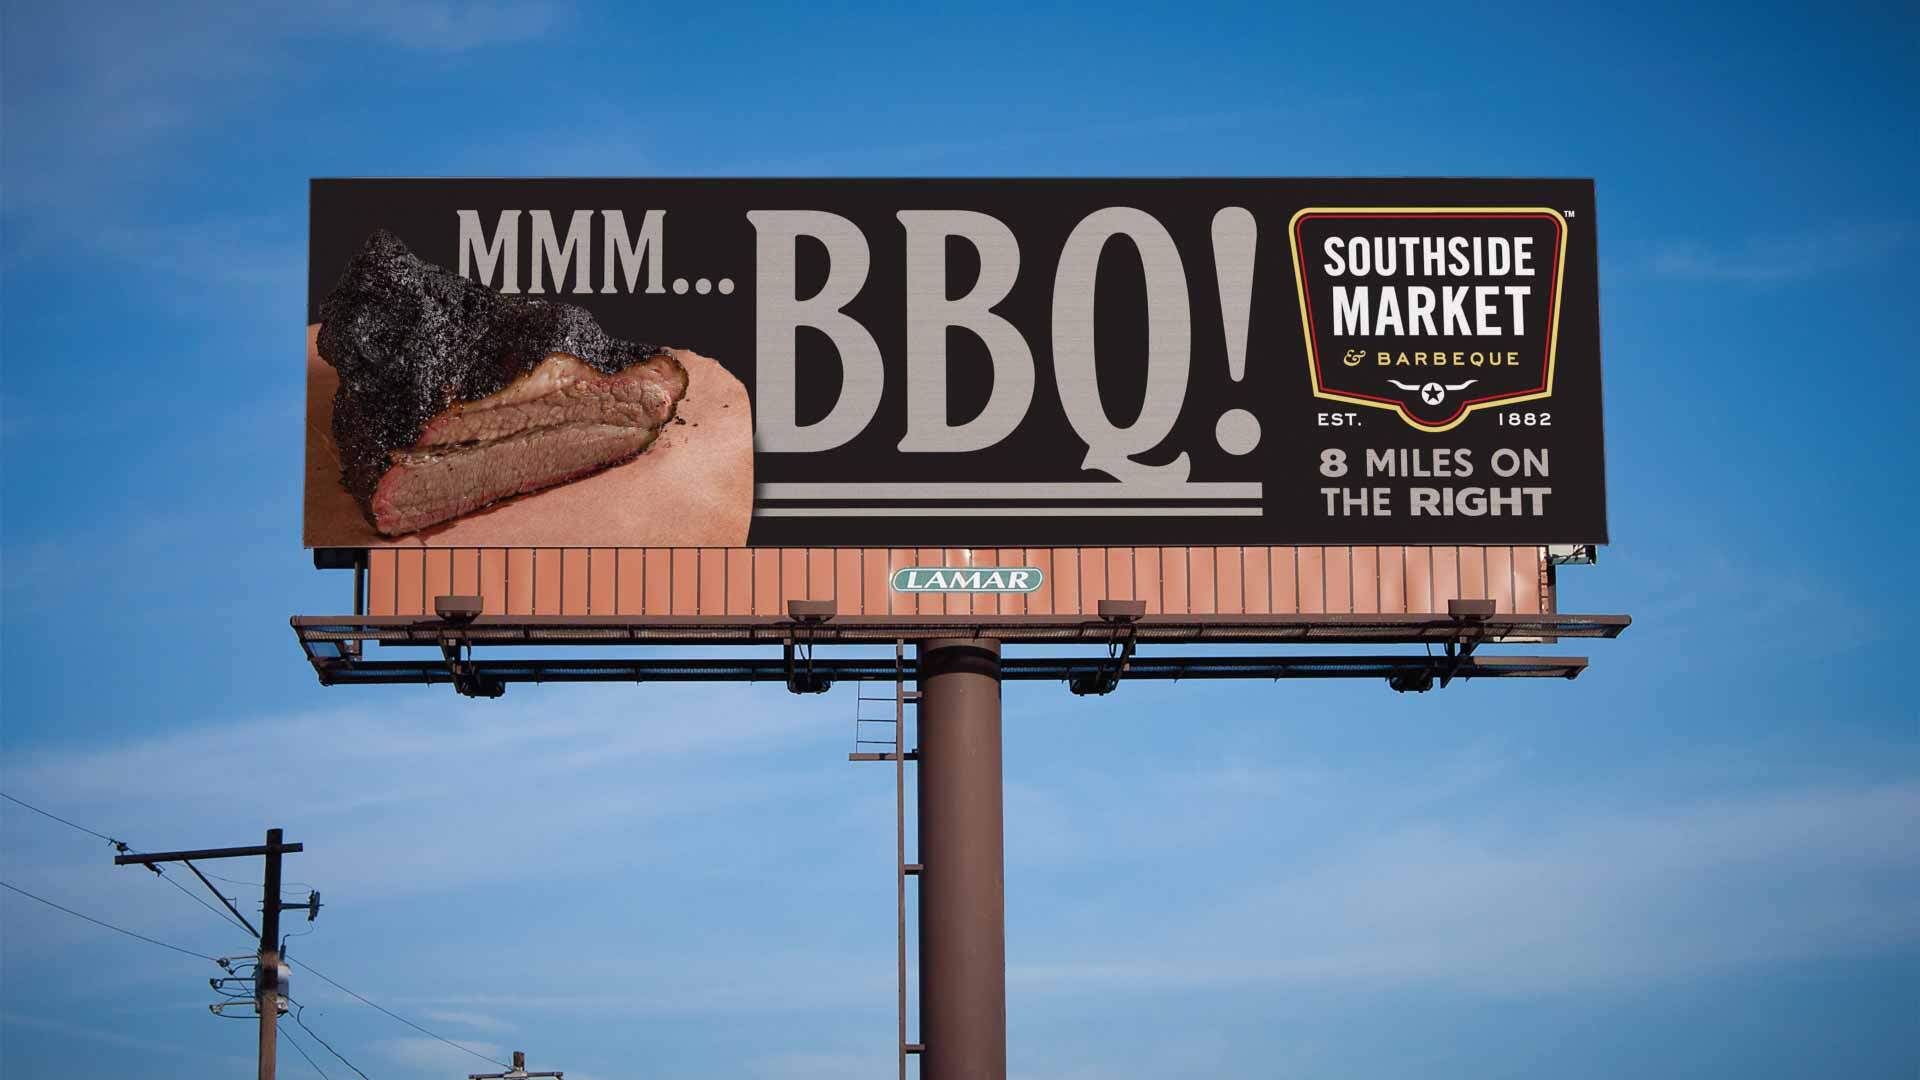 Billboard reading "MMM...BBQ!" designed by Tilted Chair for Southside Market & Barbeque